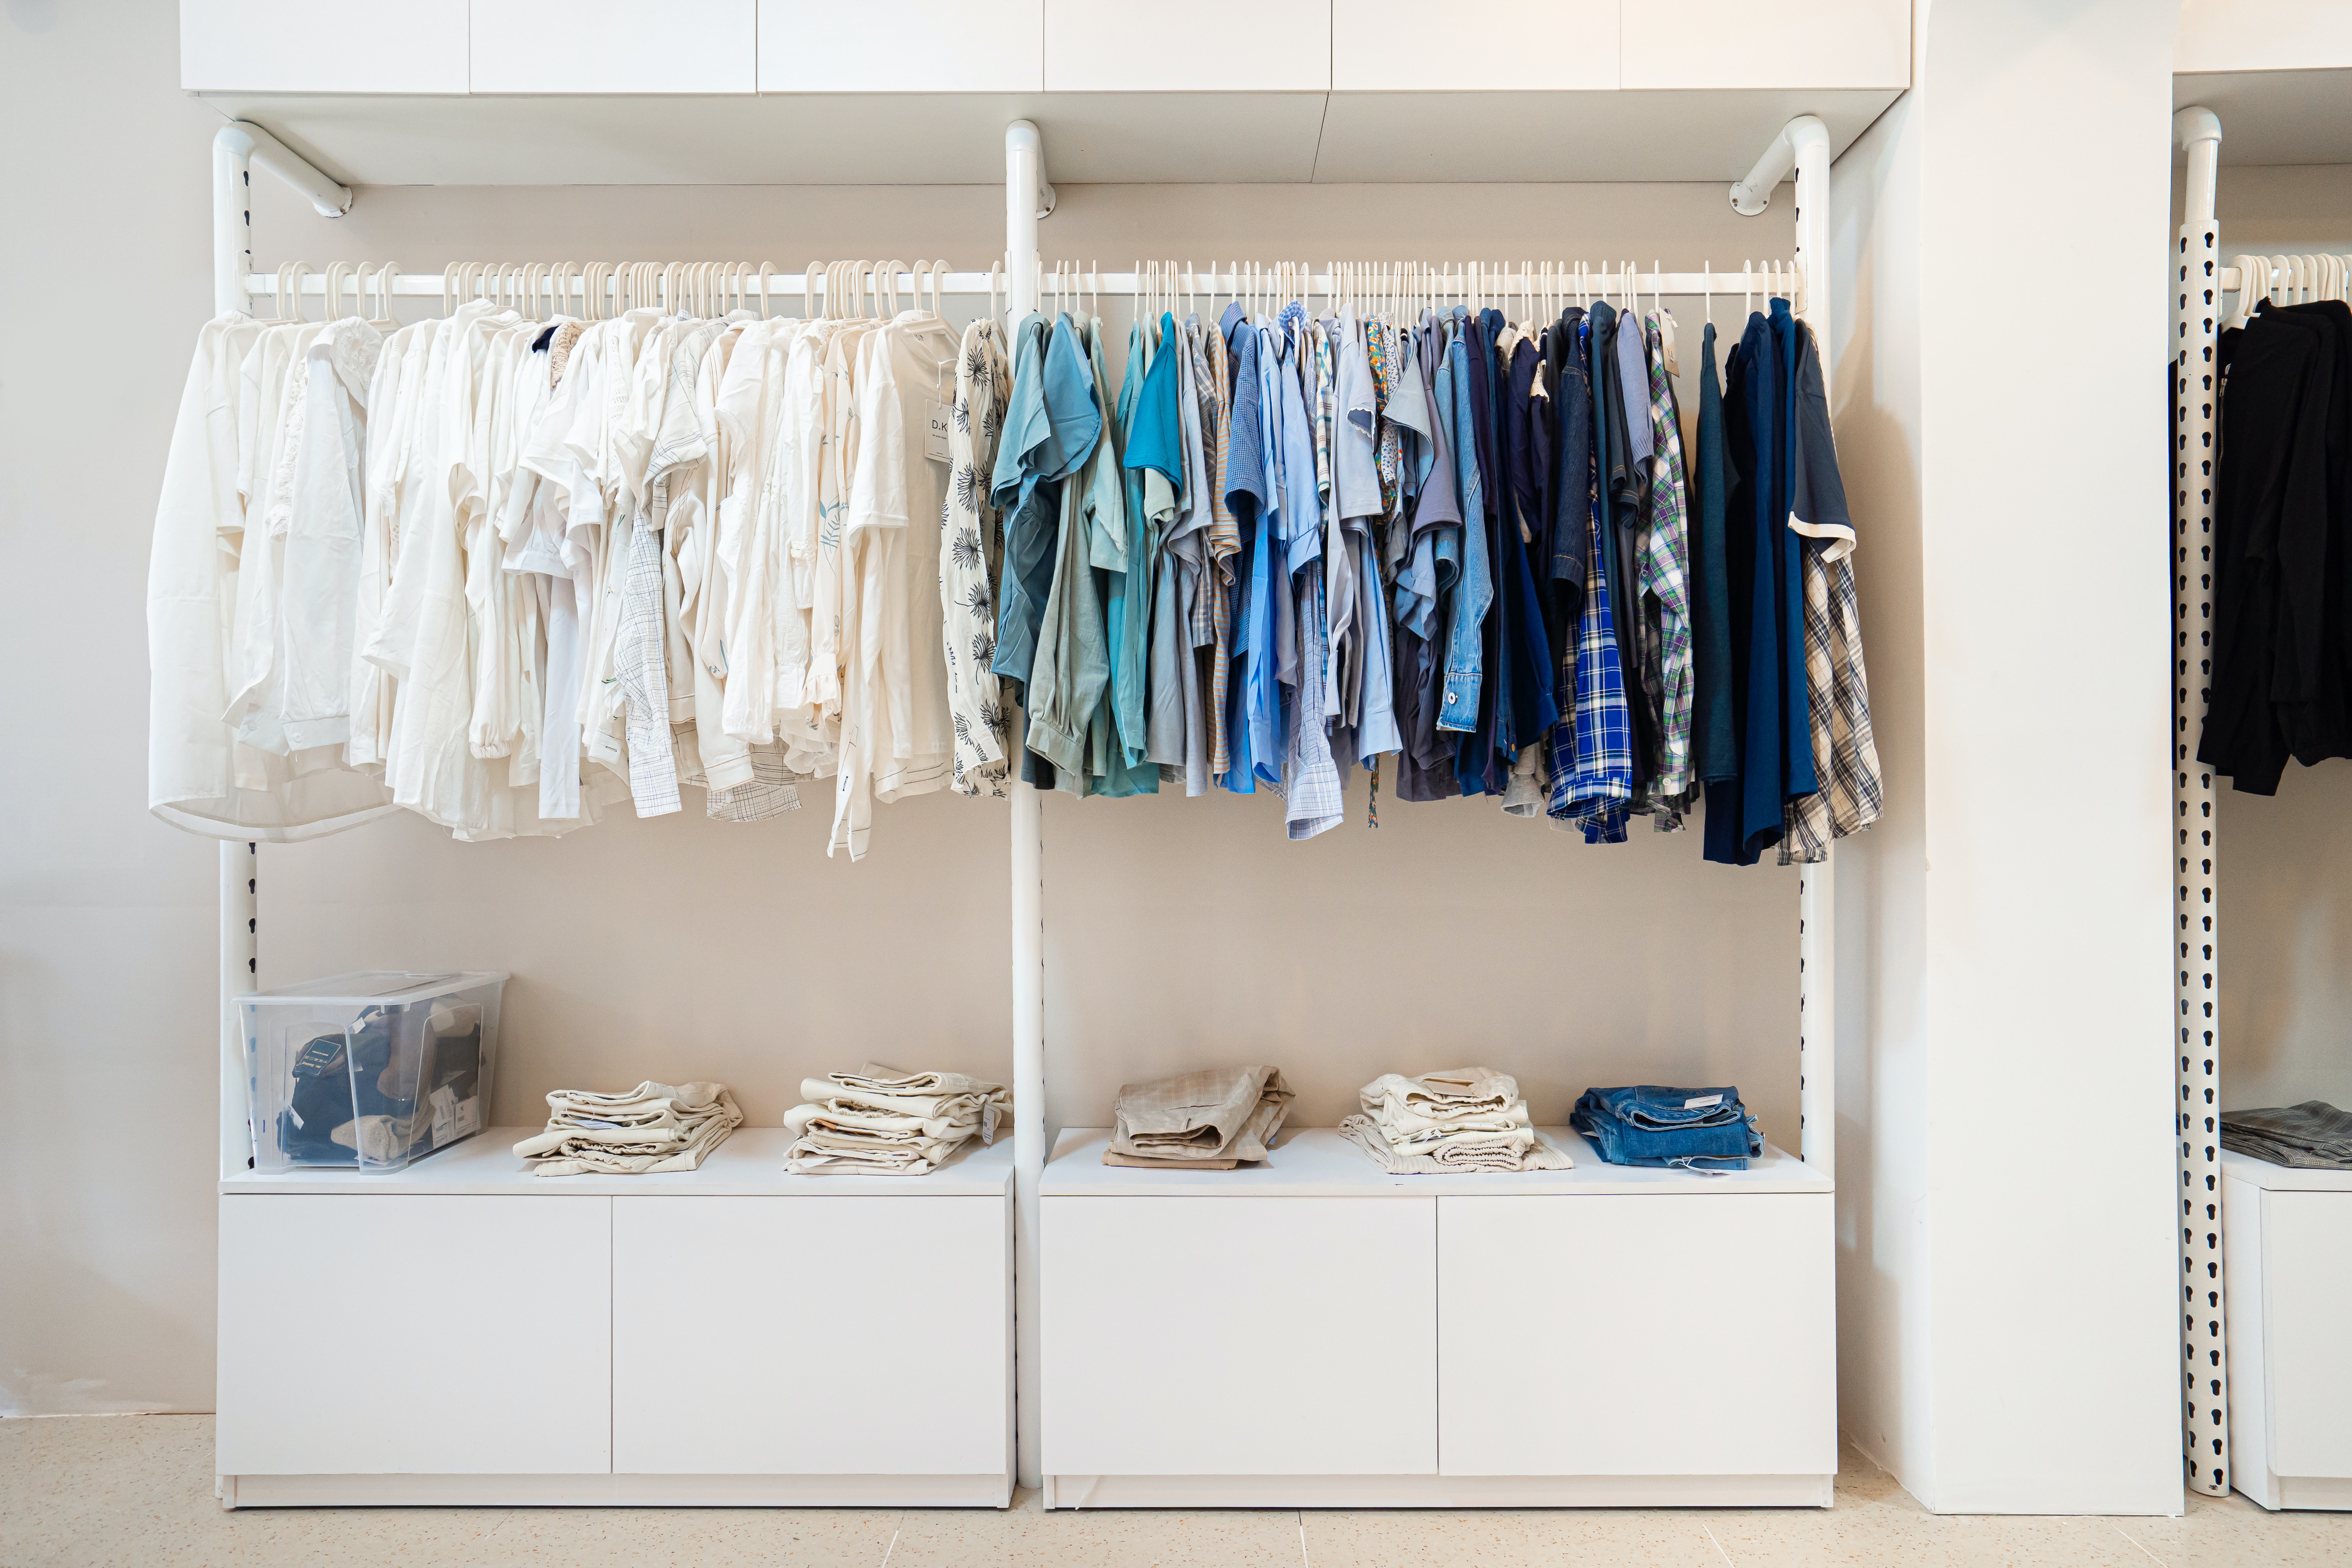 How to Mothproof Your Closet Without Smelly Mothballs